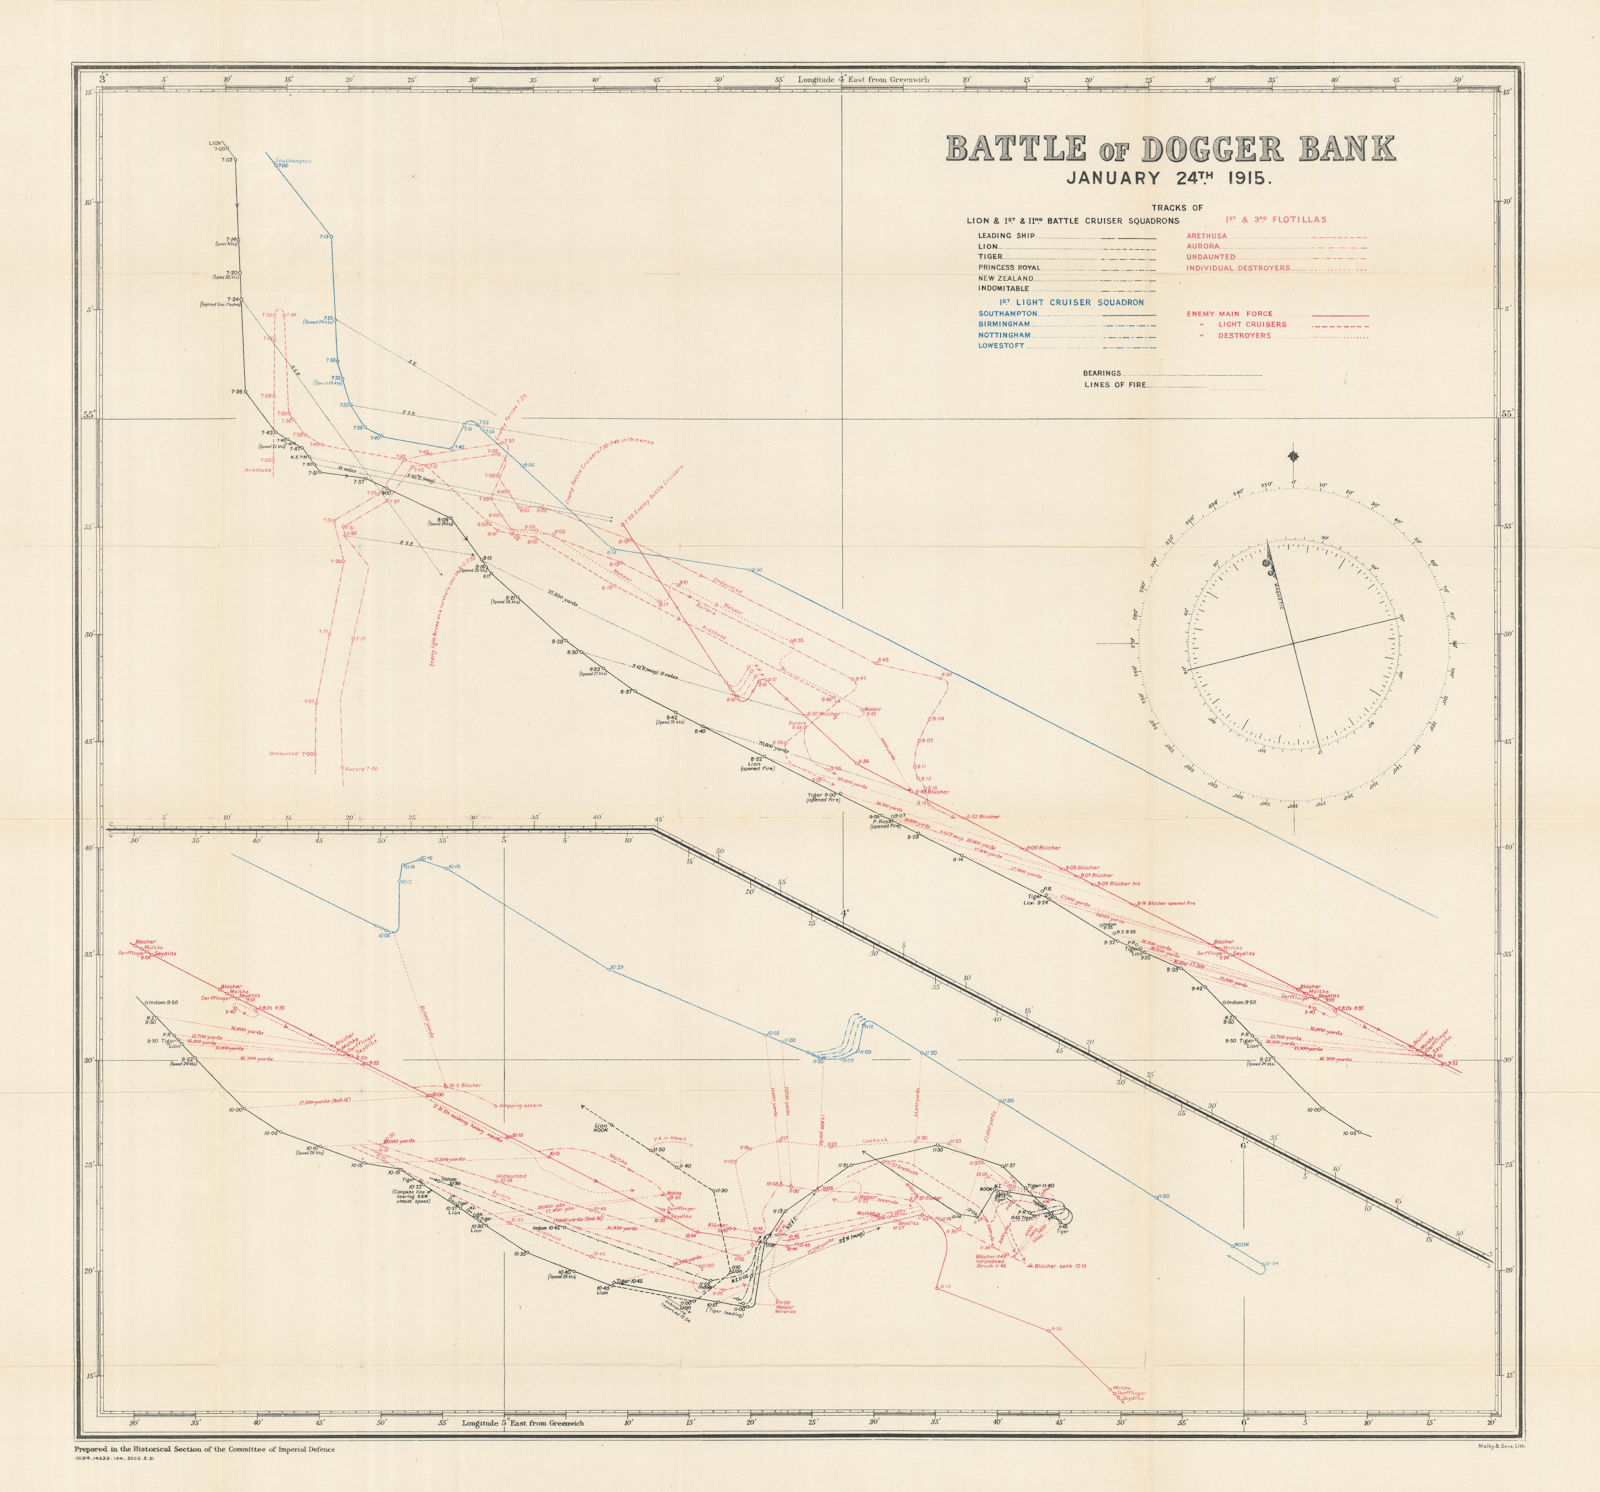 Associate Product Battle of Dogger Bank, January 24th 1915. First World War. 1921 old map